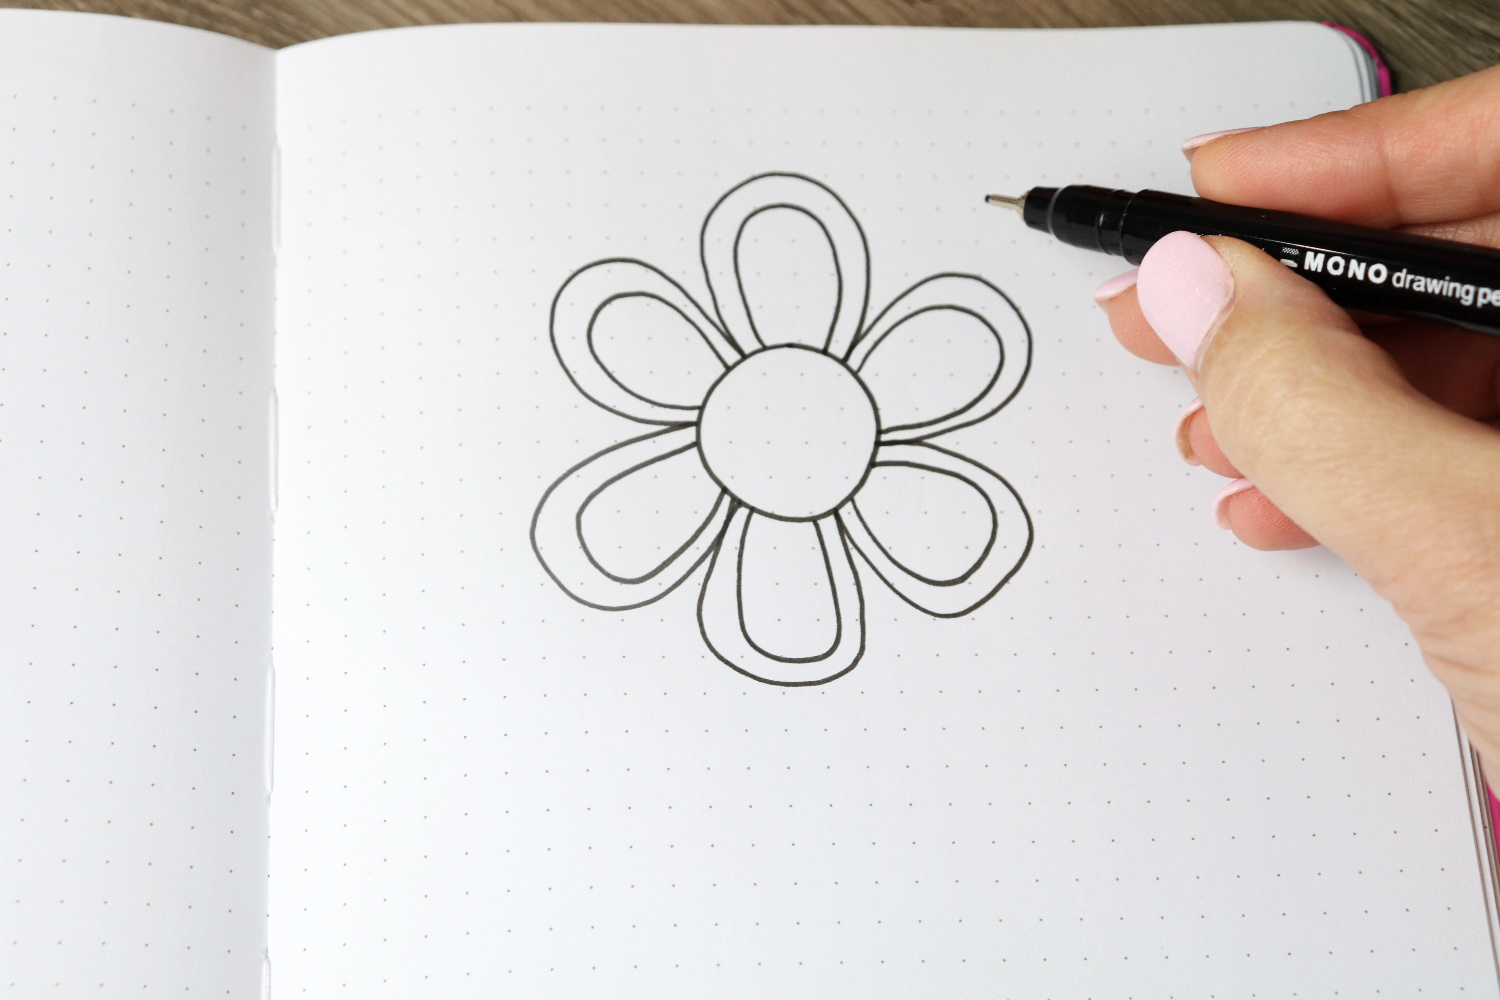 Image contains an open sketch book with a six petaled flower drawn on the right-hand page. Amy’s hand holds a MONO Drawing Pen 05 above the page.